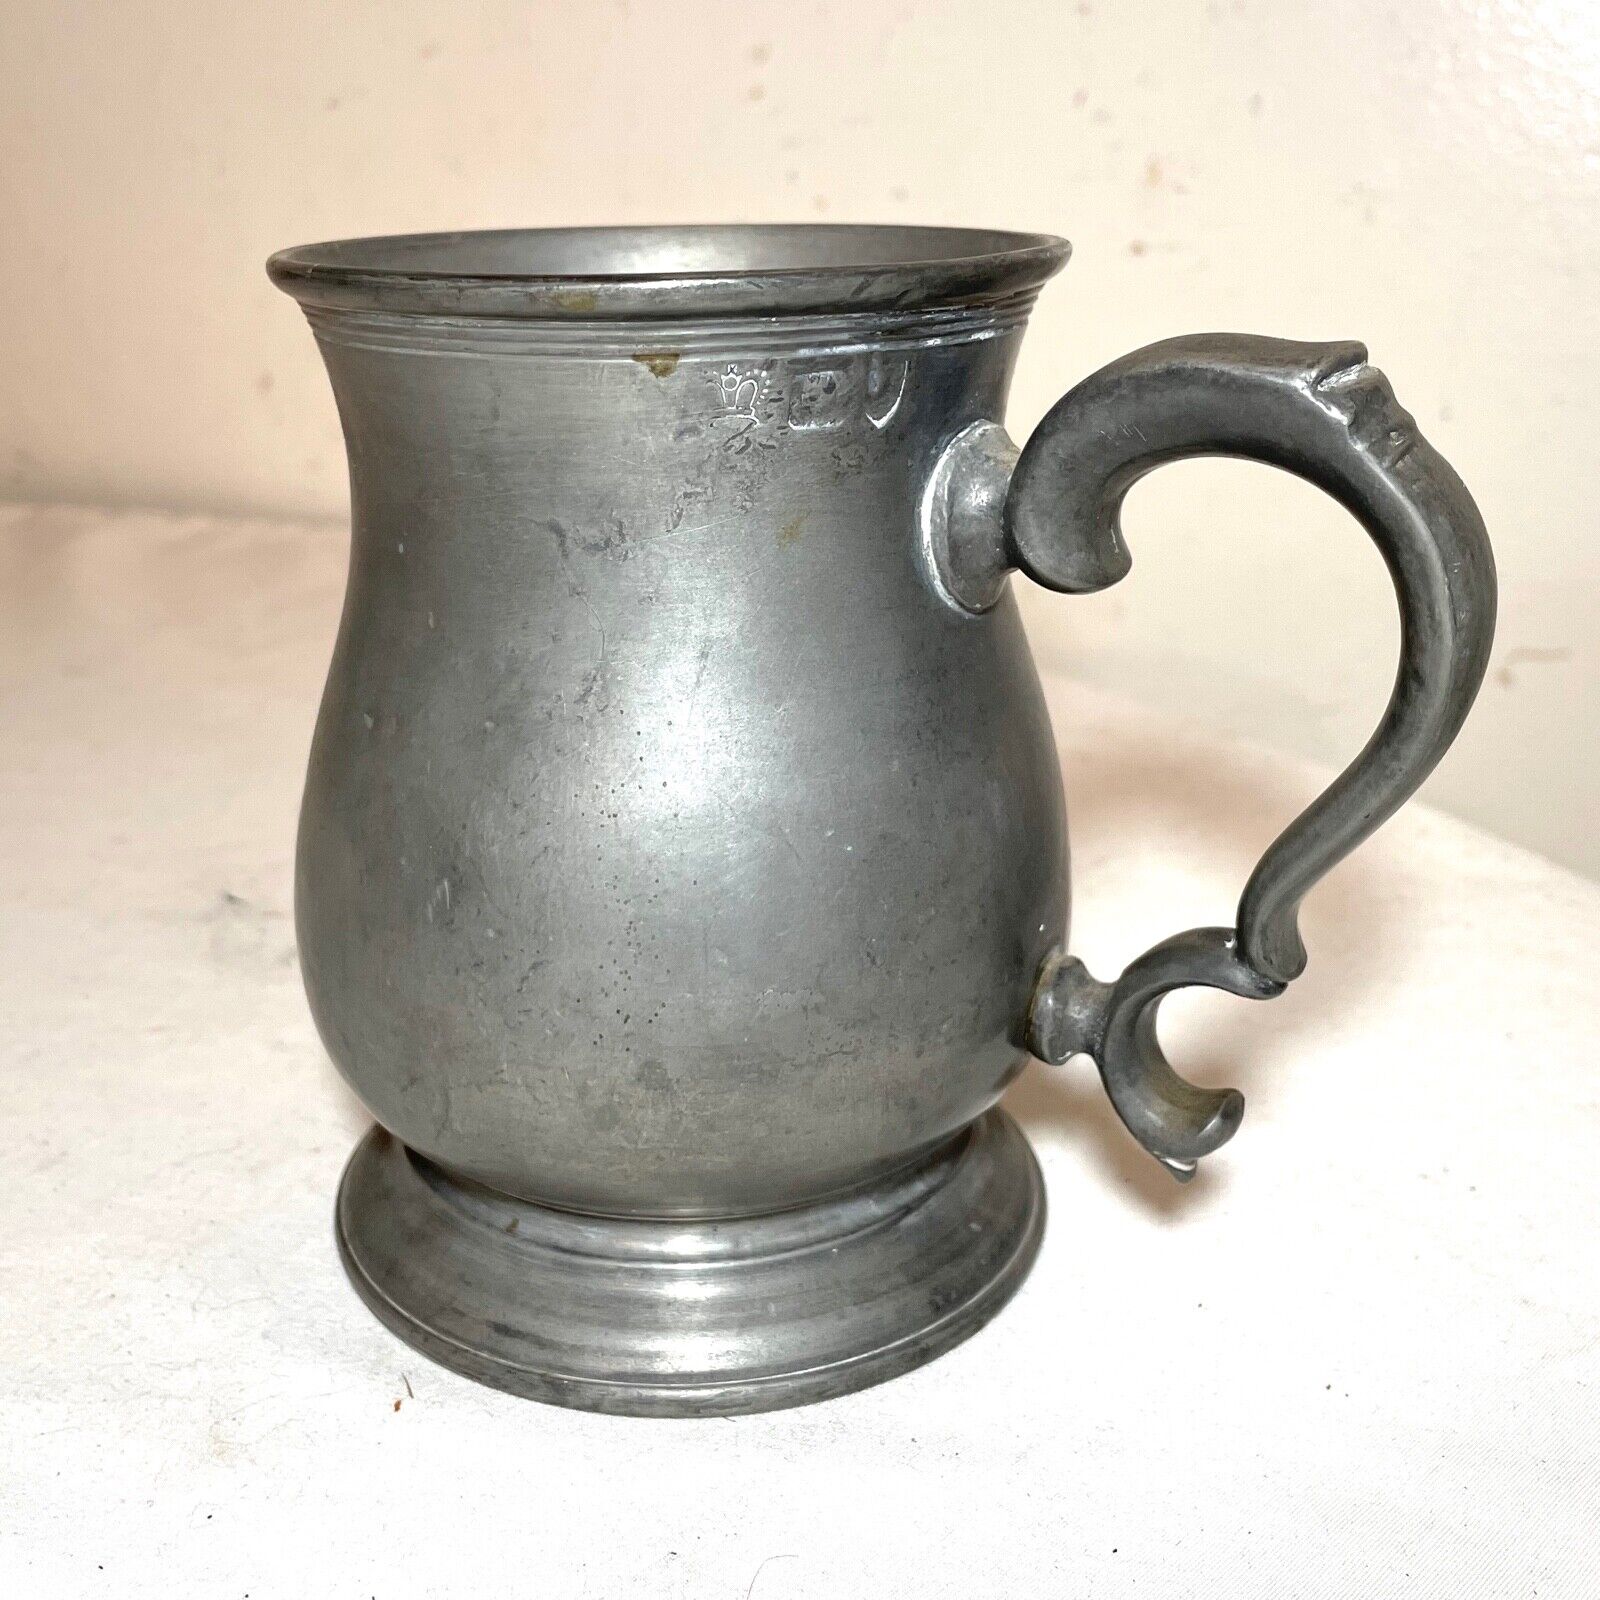 rare antique 18th century 1700\'s handmade pewter beer mug stein touch mark early